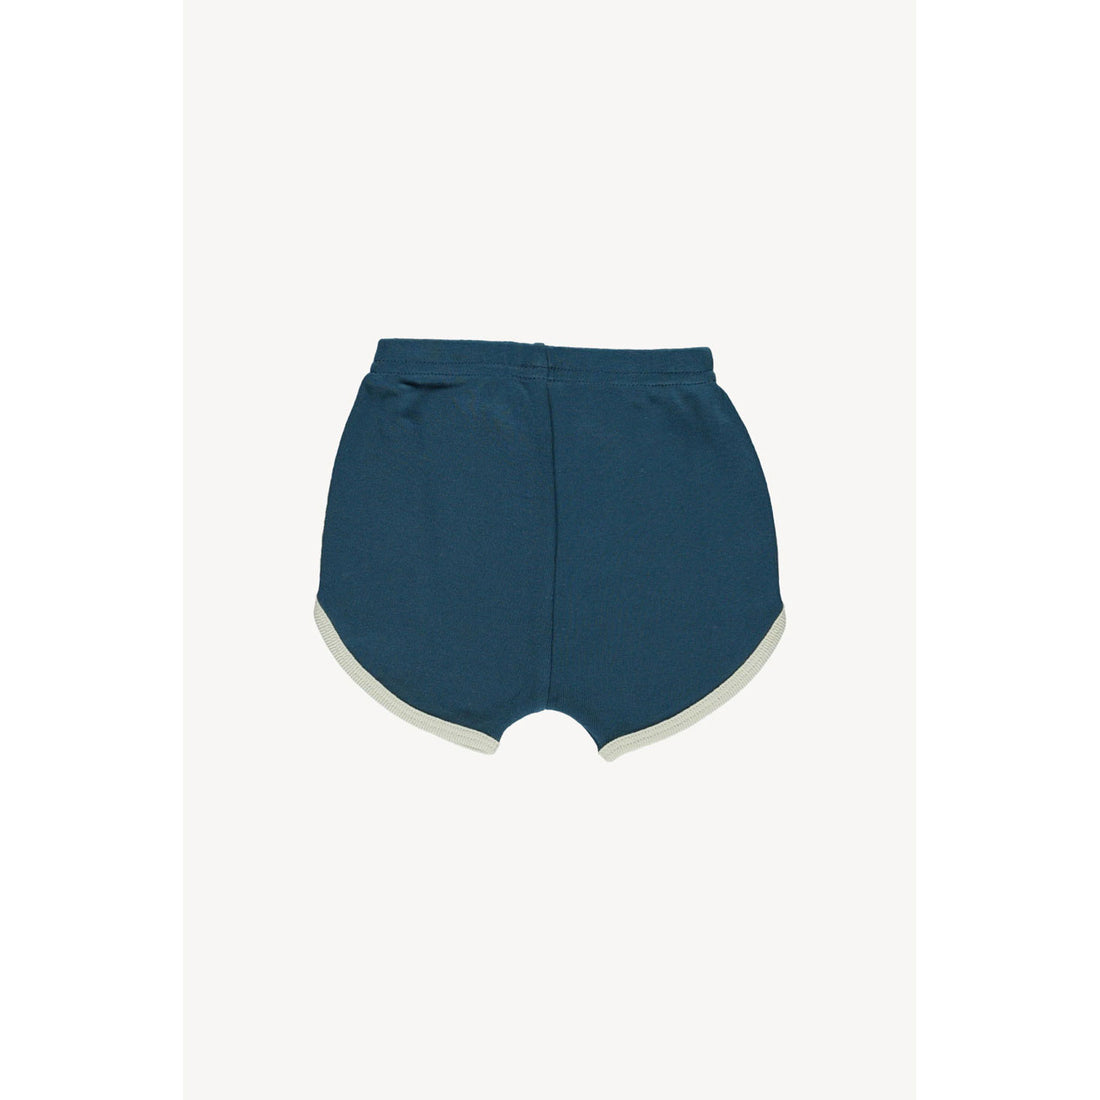 Fin and Vince Ocean Track Shorts